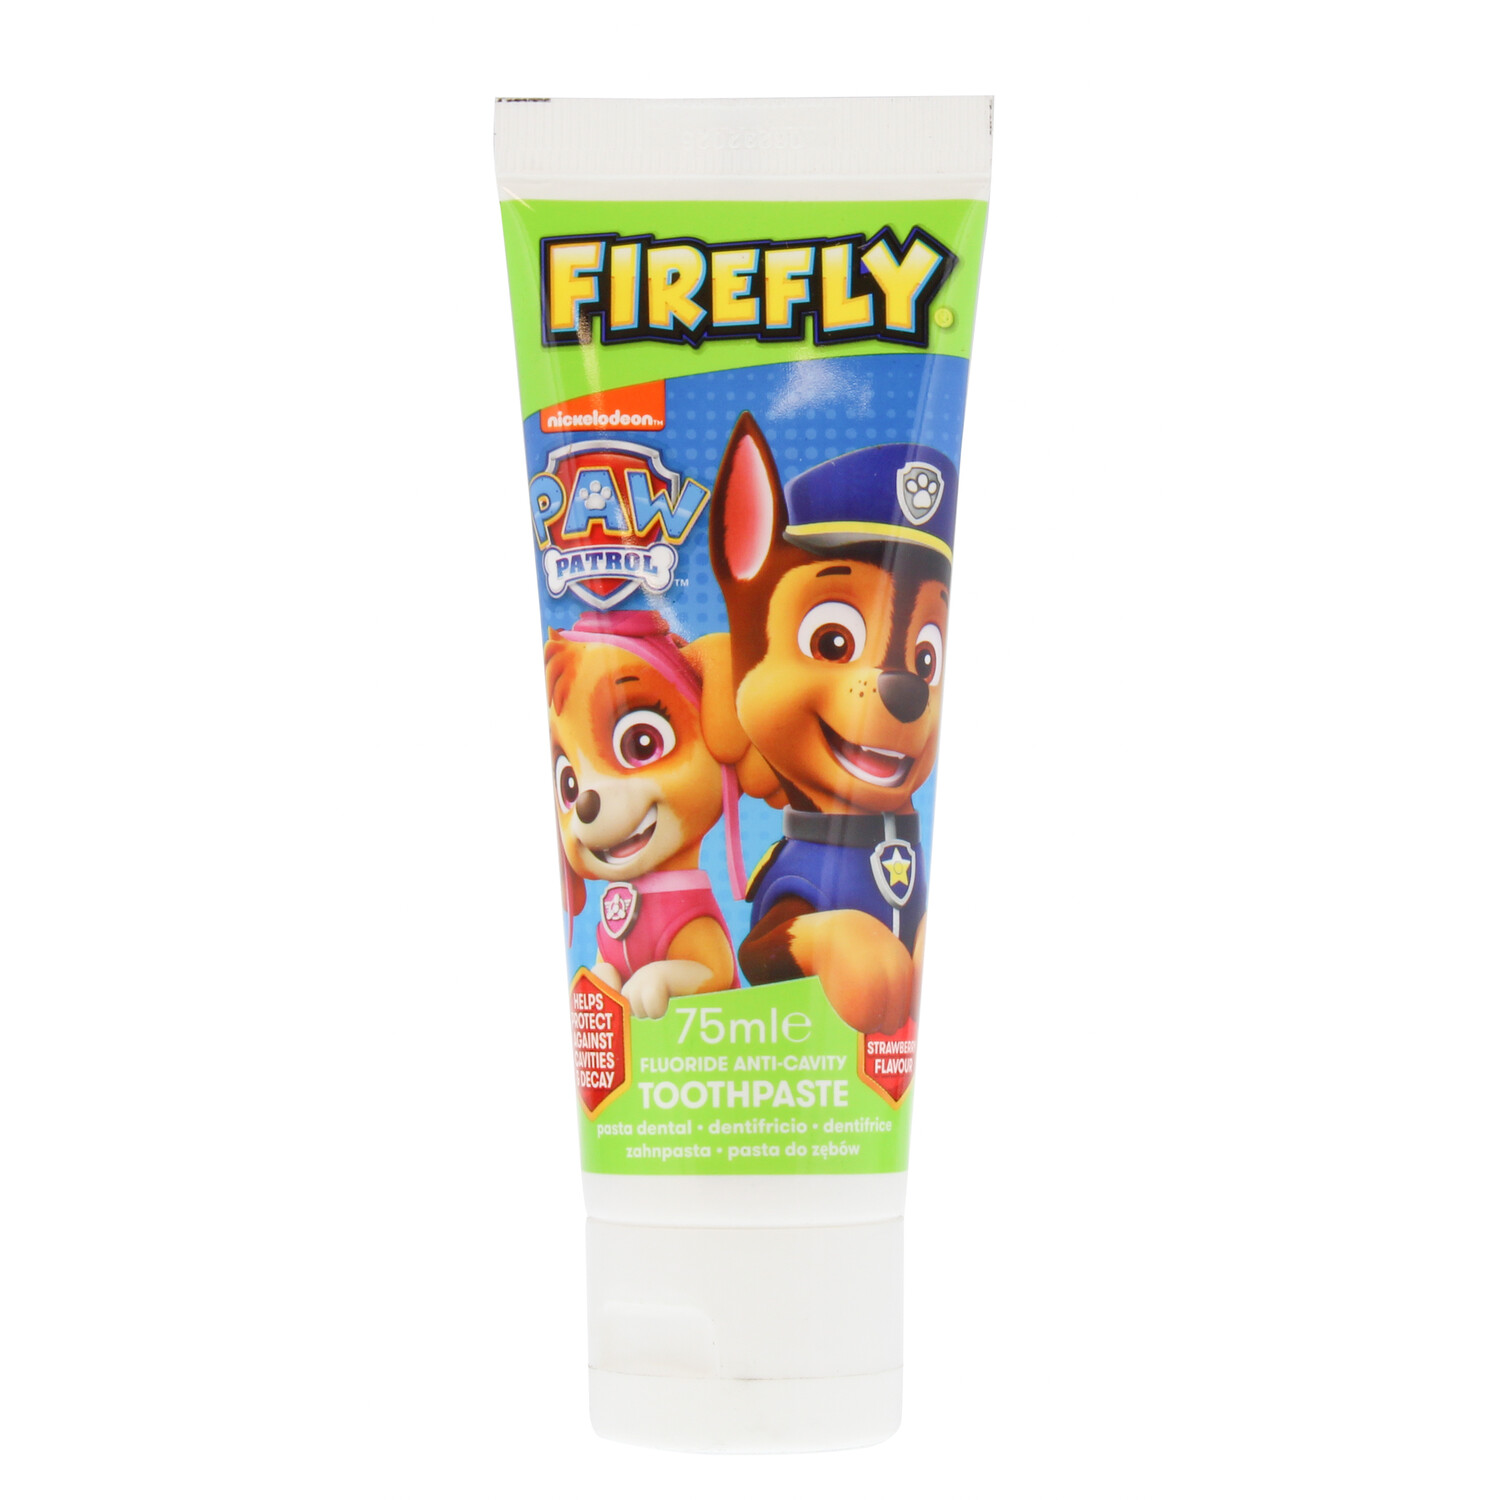 Firefly Paw Patrol Toothpaste 75ml - Green Image